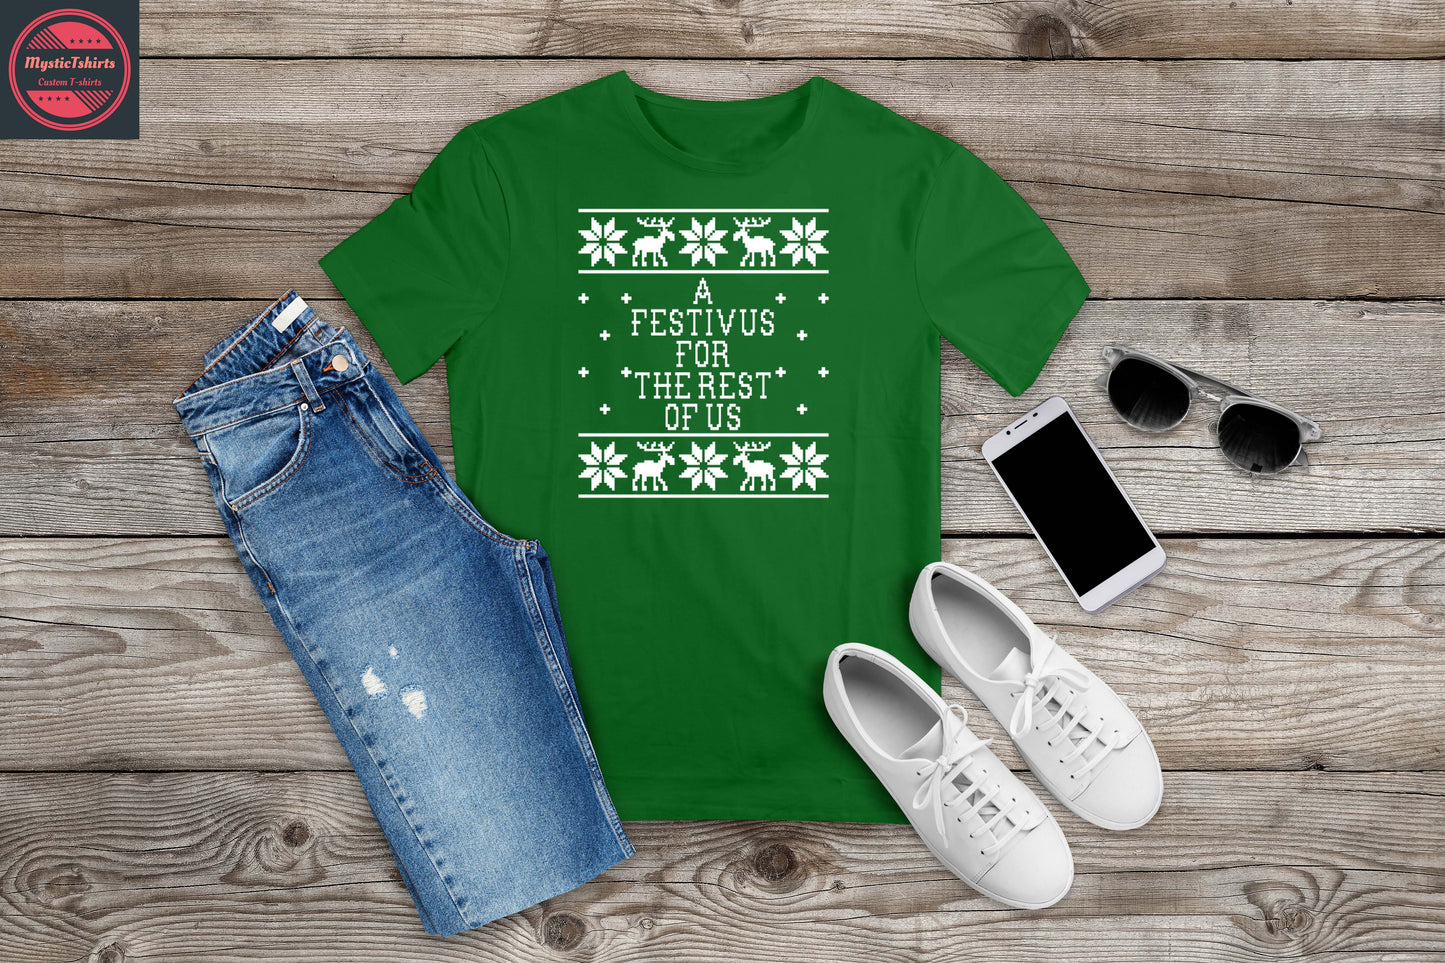 006. A FESTIVUS FOR THE REST OF US, Custom Made Shirt, Personalized T-Shirt, Custom Text, Make Your Own Shirt, Custom Tee